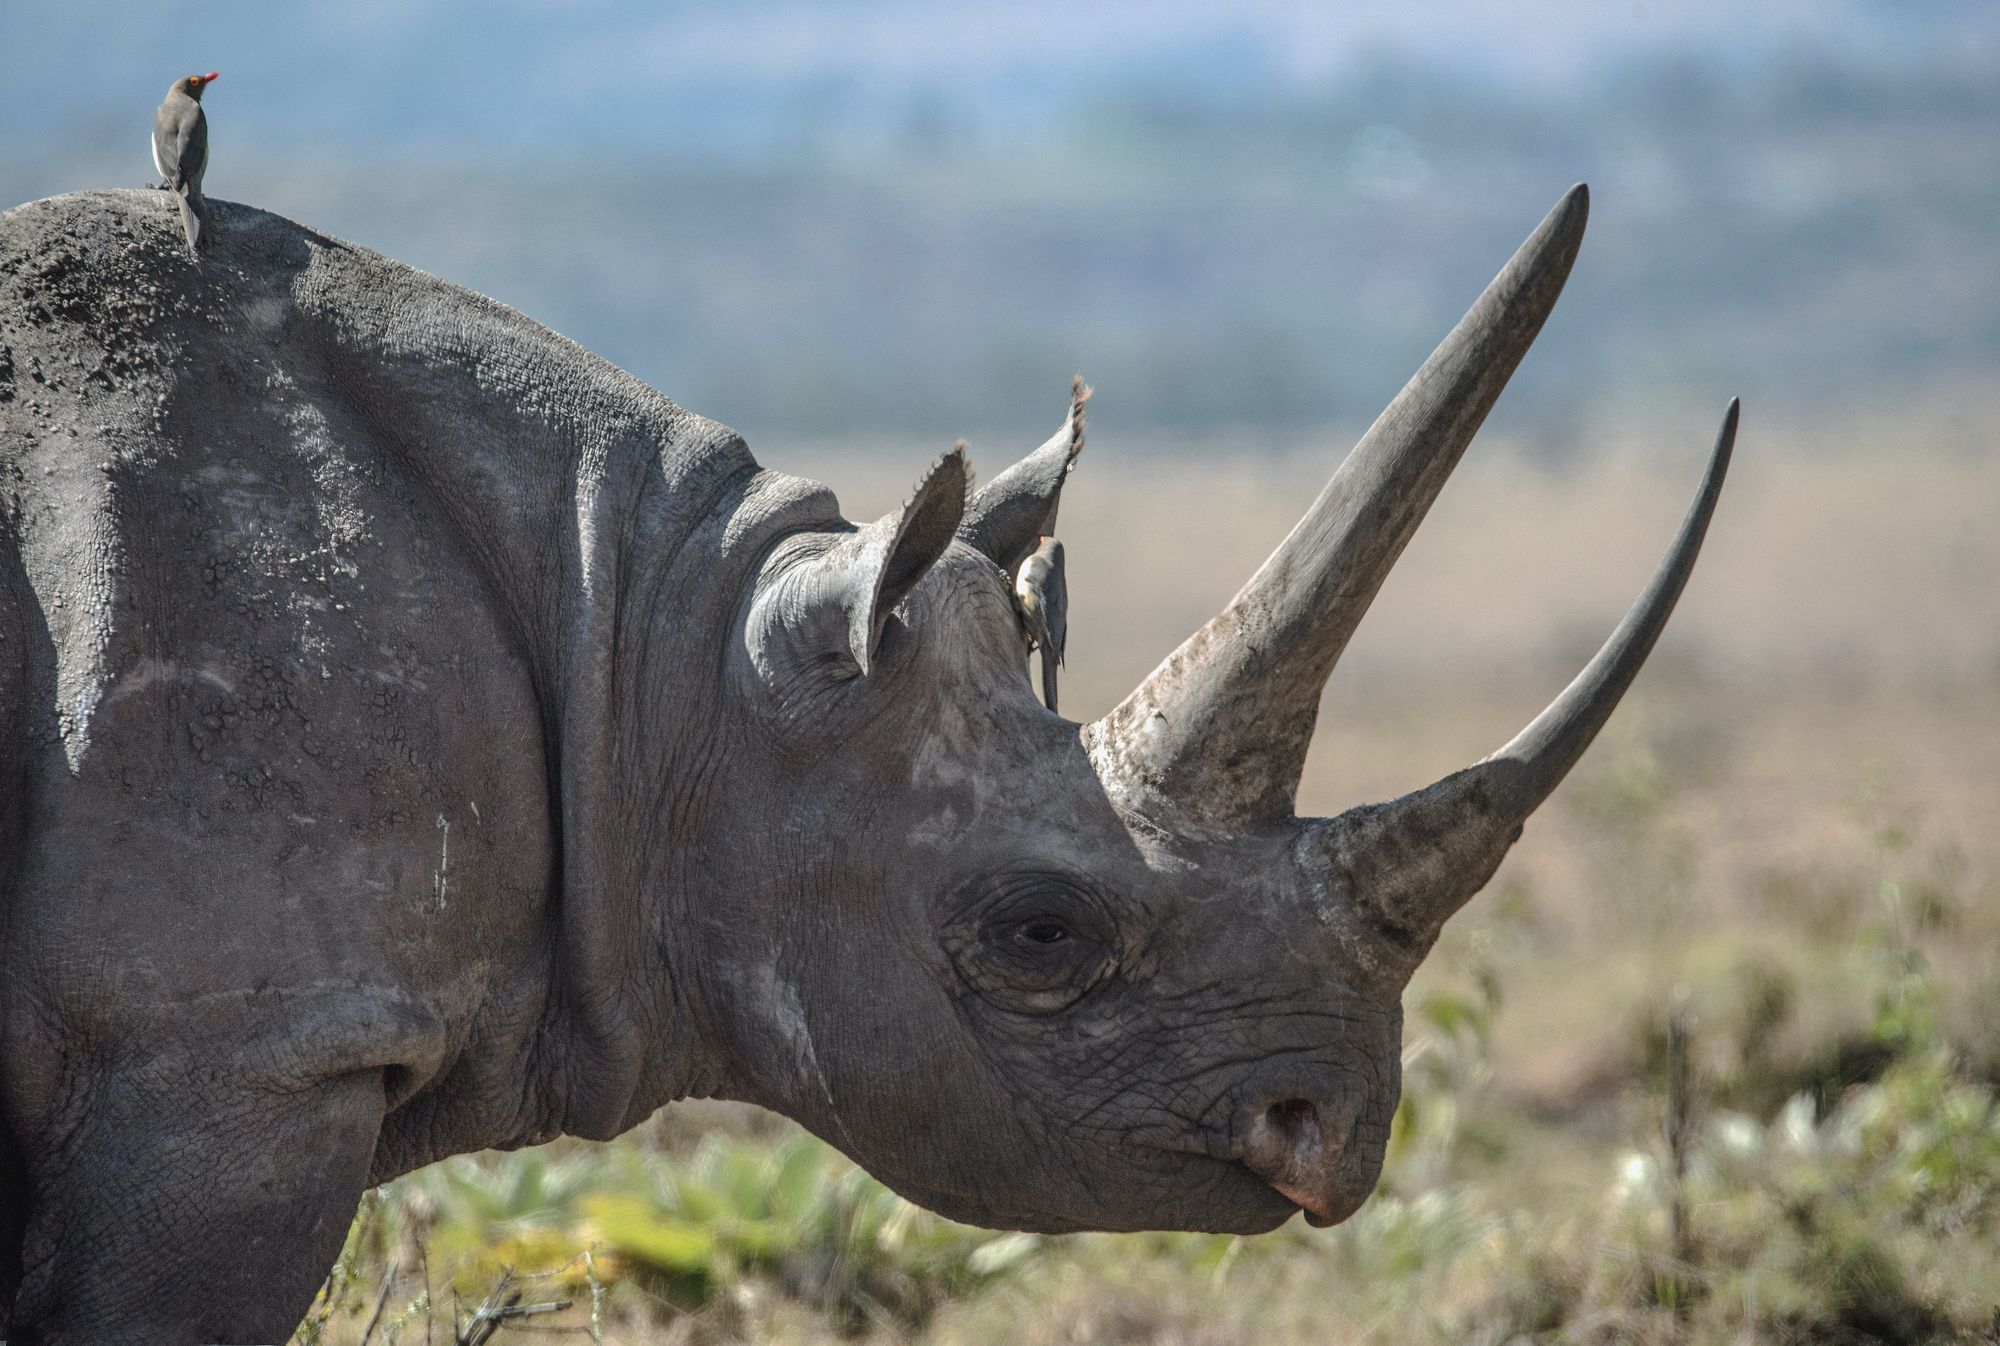 Photograph of a rhinoceros in profile with a bird on its head and a bird on its back.